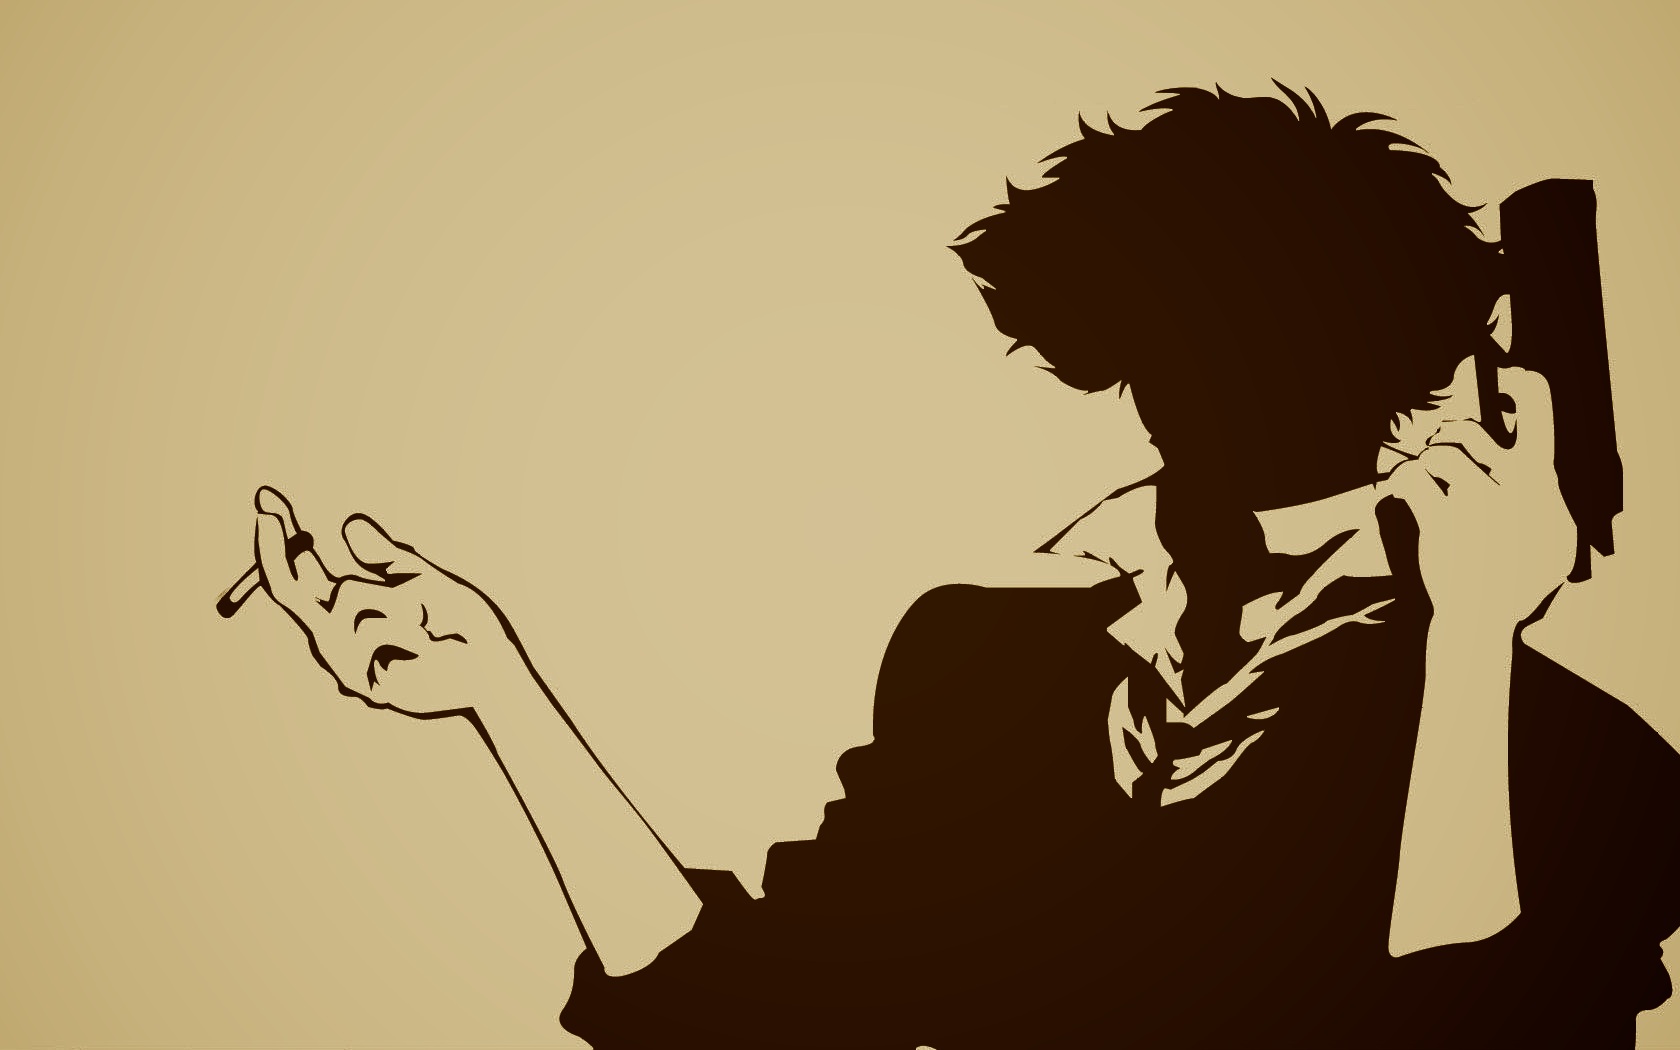 Spike Spiegel, the main character from the anime series Cowboy Bebop.